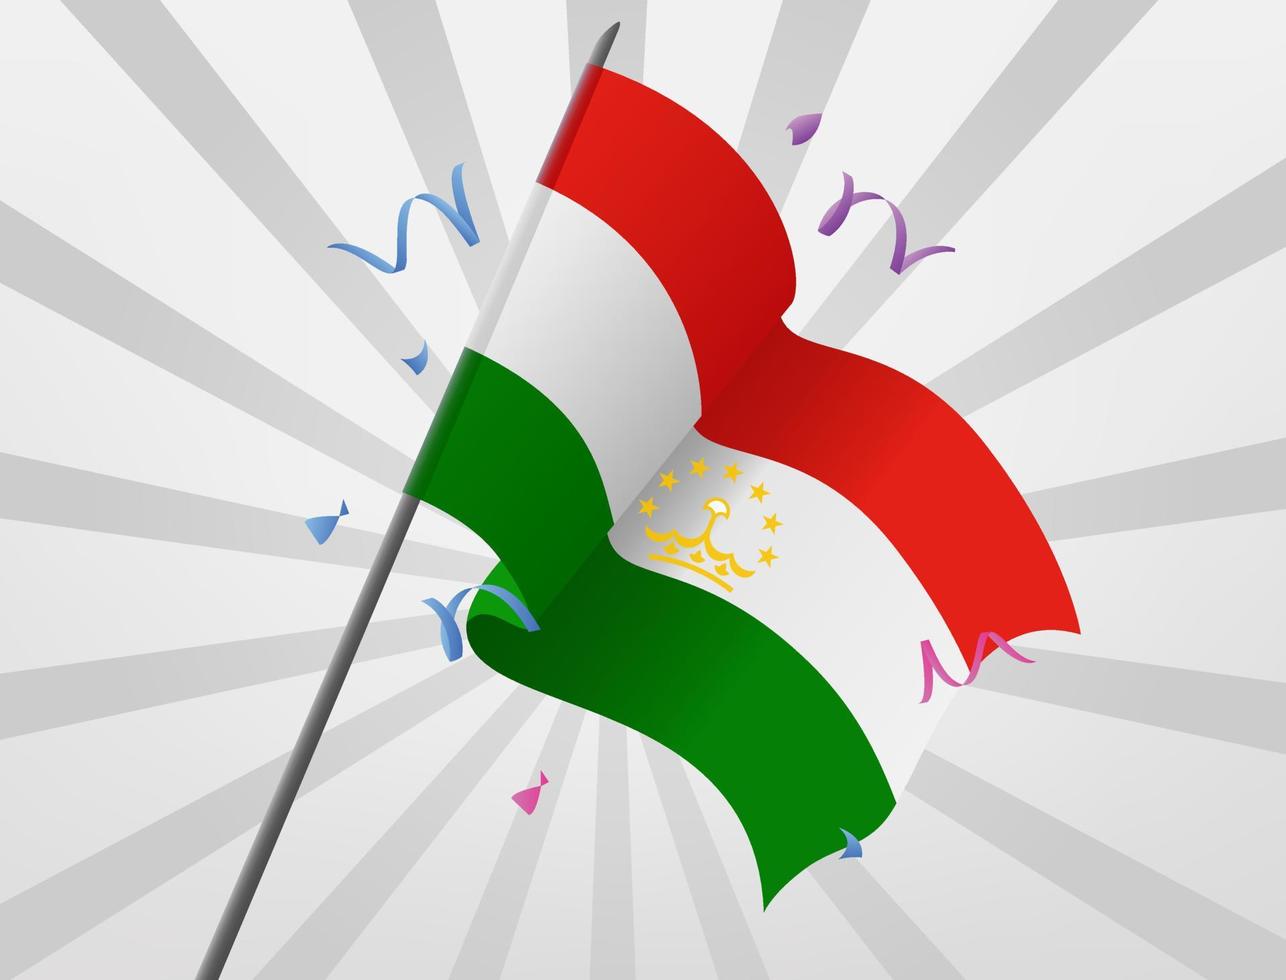 The celebration flag of the country of Tajikistan flies at a height vector